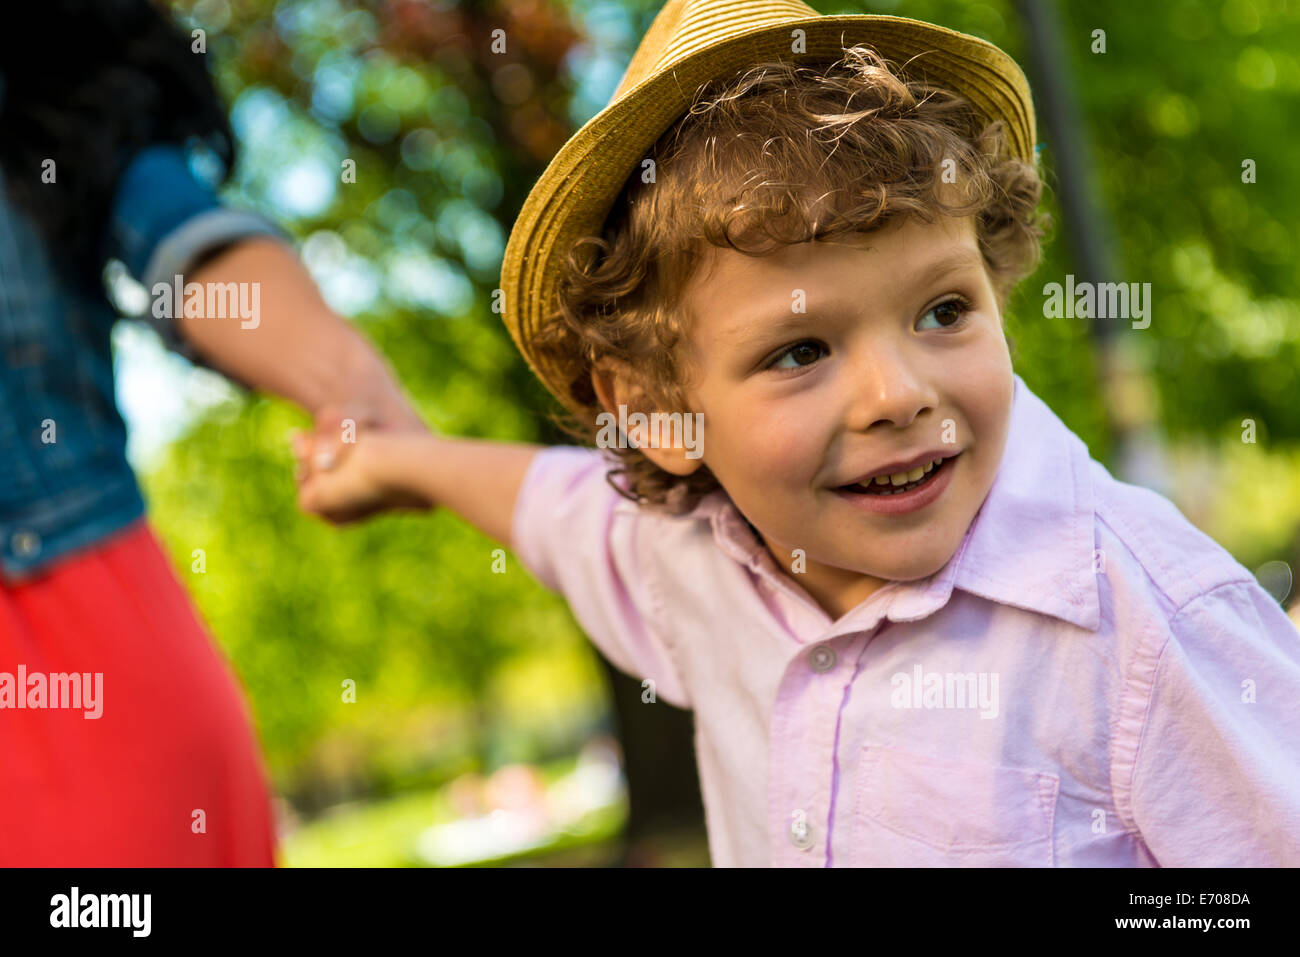 Close up of boy holding mother's hand in park Stock Photo